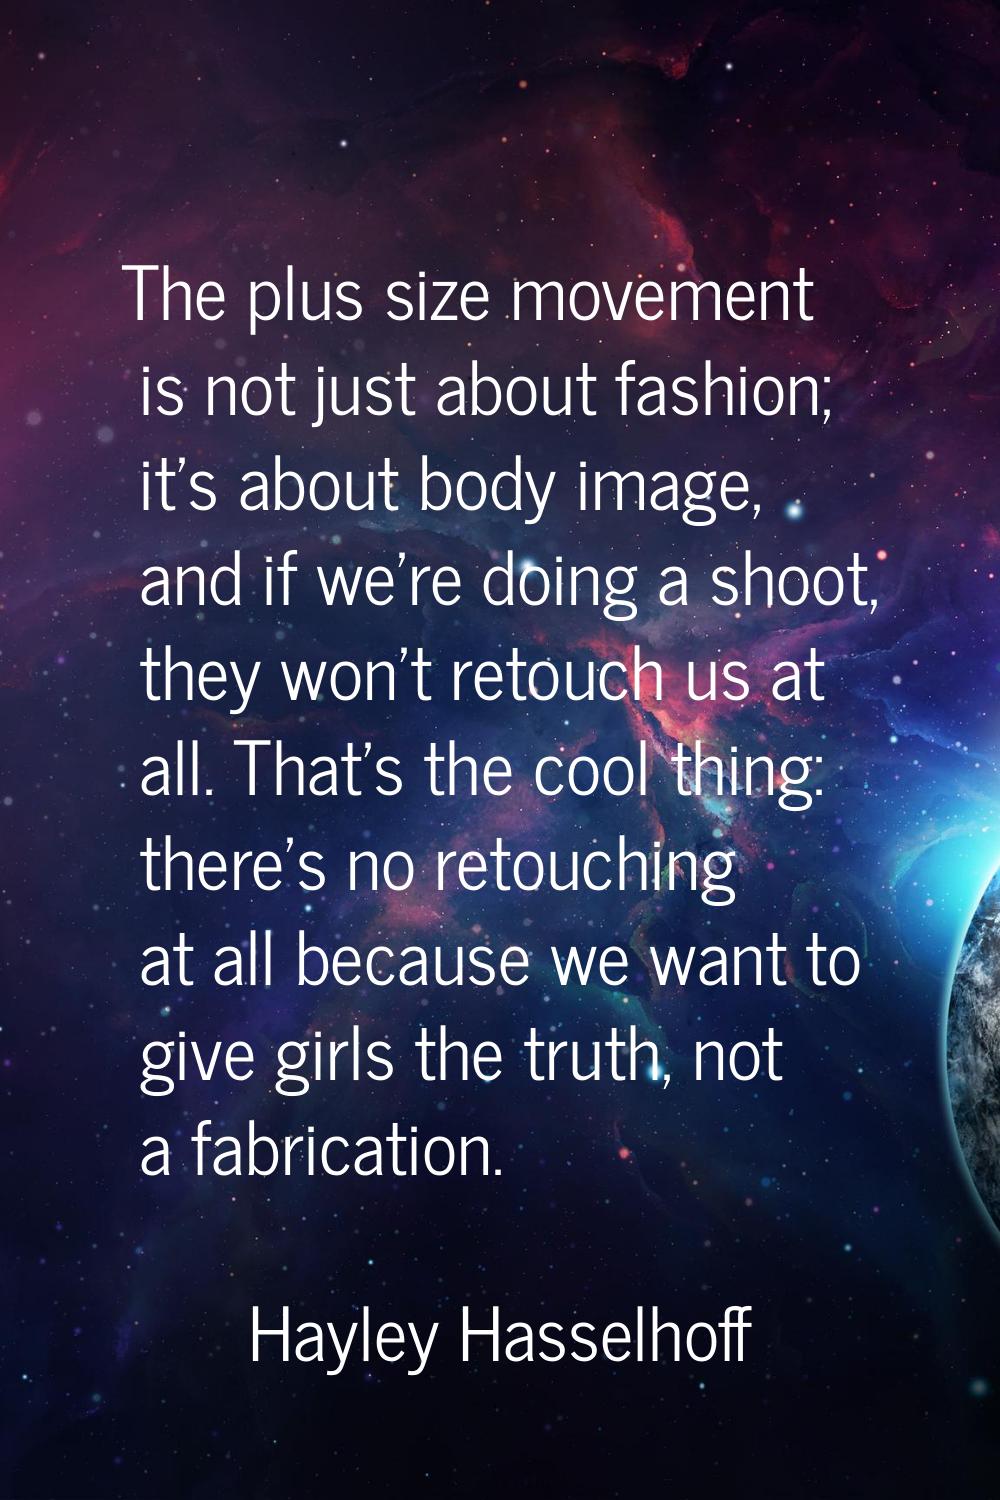 The plus size movement is not just about fashion; it's about body image, and if we're doing a shoot